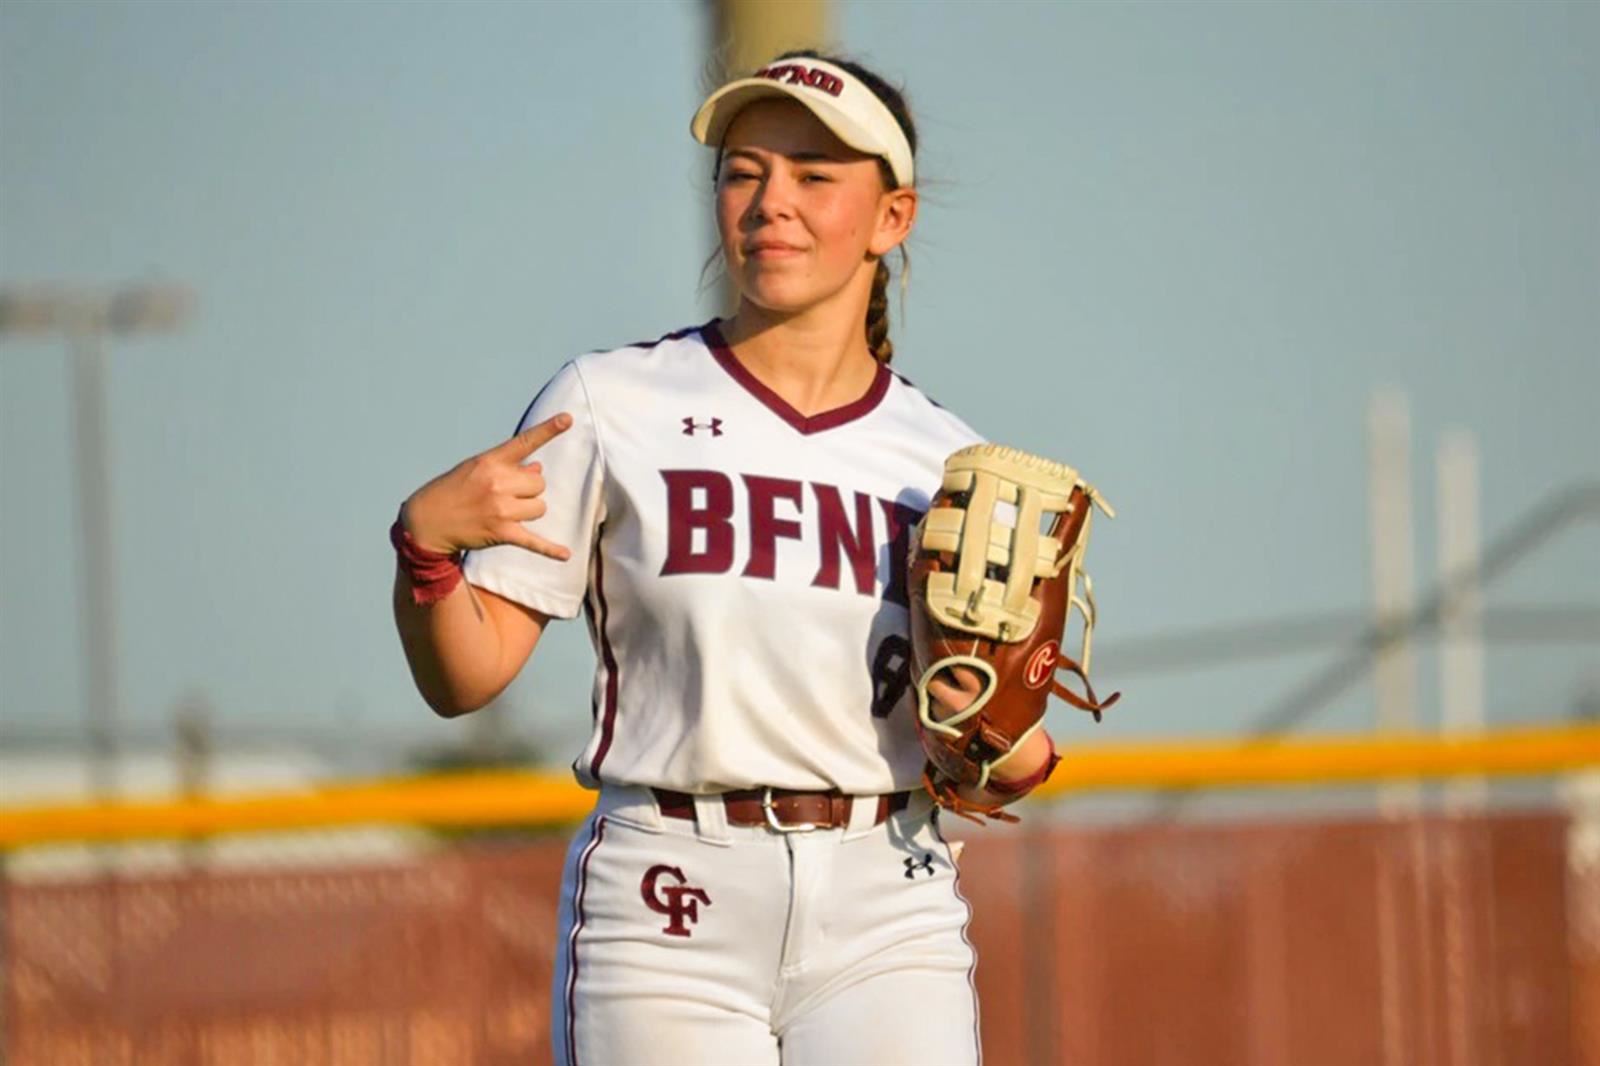 Cy-Fair High School senior Alana Gray earned honorable mention accolades on the 2022 TSWA All-State Team.